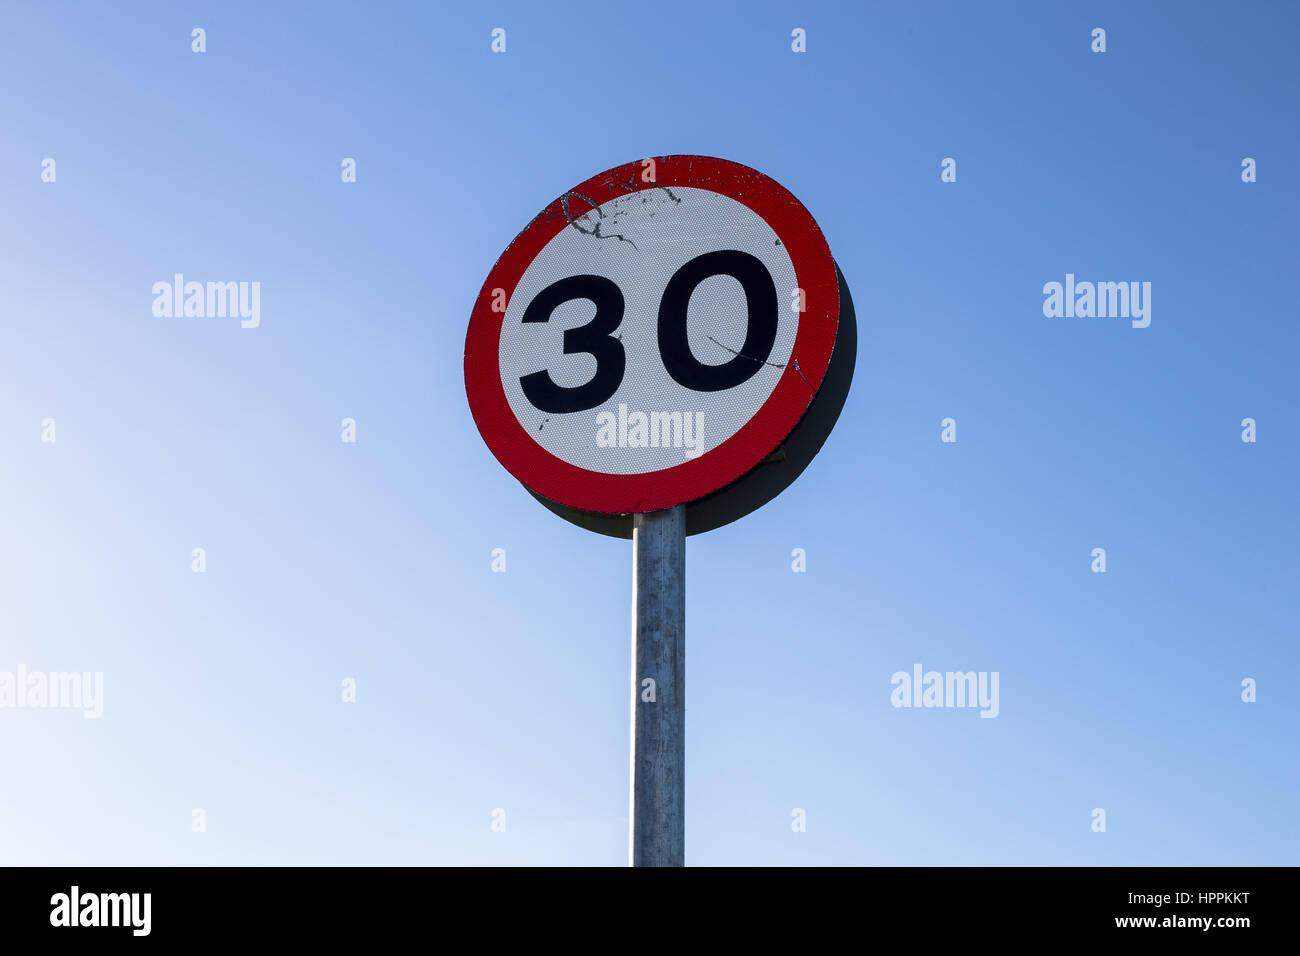 A speed limit sign stands against a blue sky indicating a maximum permissible speed of 30 mph in the village of Bishops Lydeard, Somerset, UK. Stock Photo